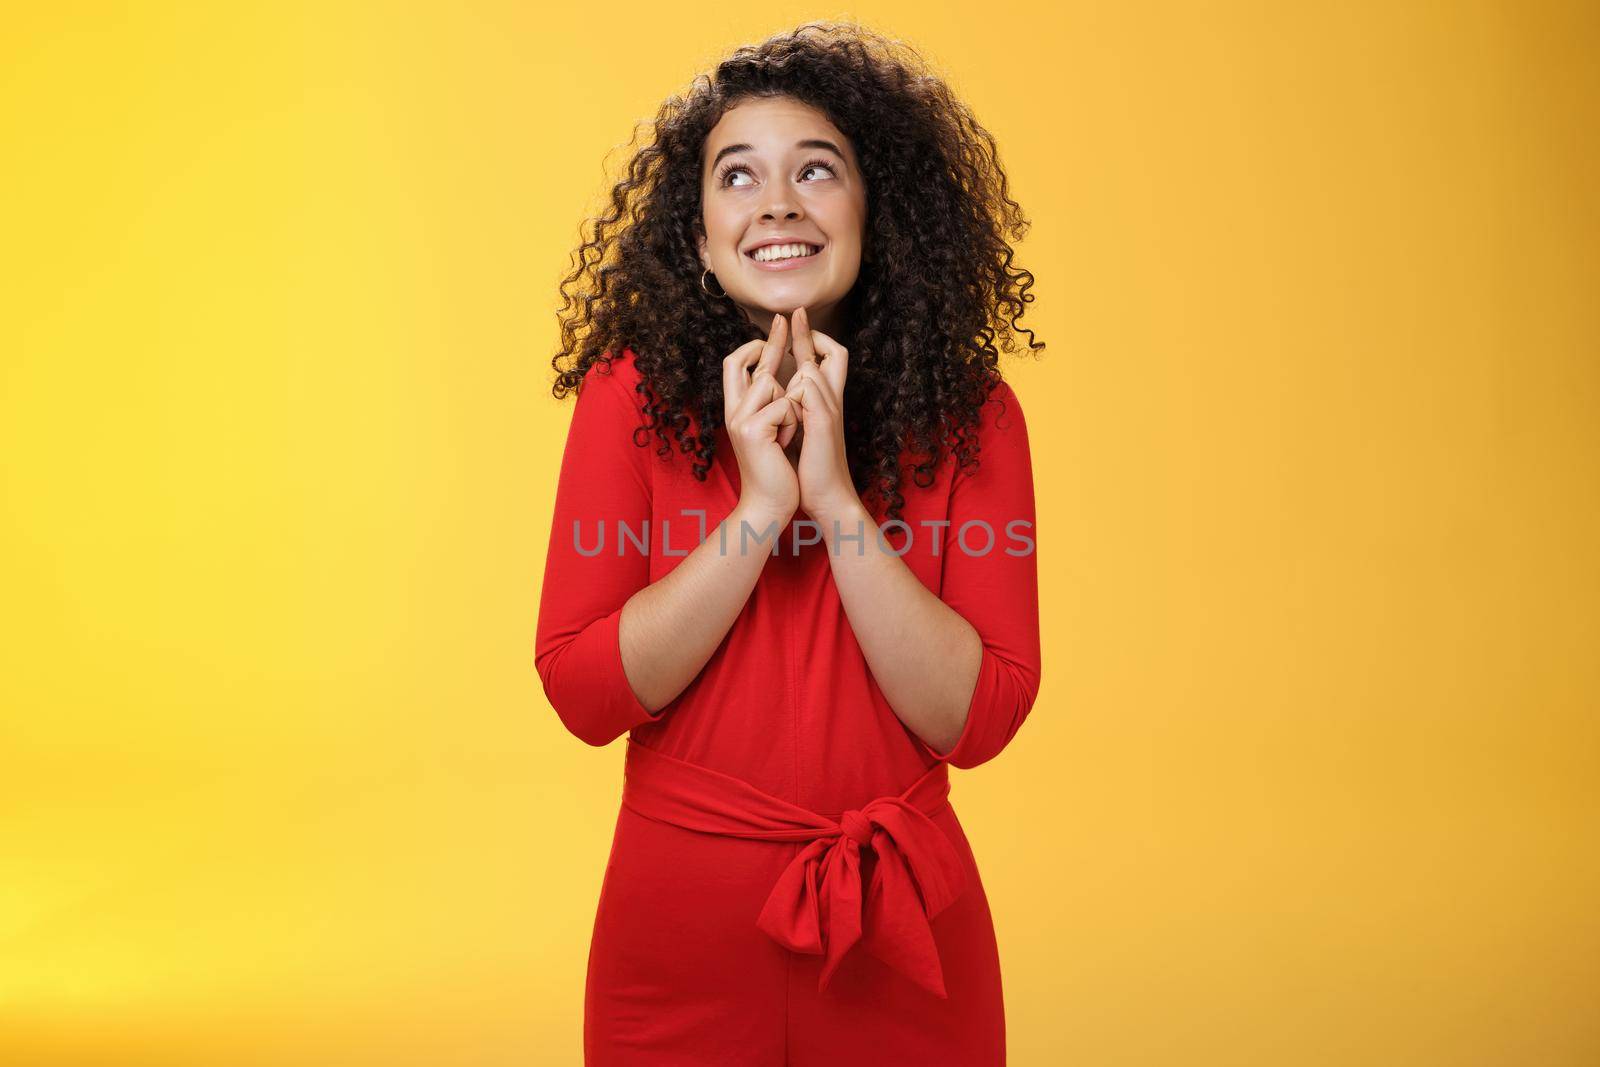 Hopeful, excited cute tender woman in red dress with curly hair standing new x-mass tree crossing fingers for good luck and smiling with head raised to sky making wish, having faith in dream come true.